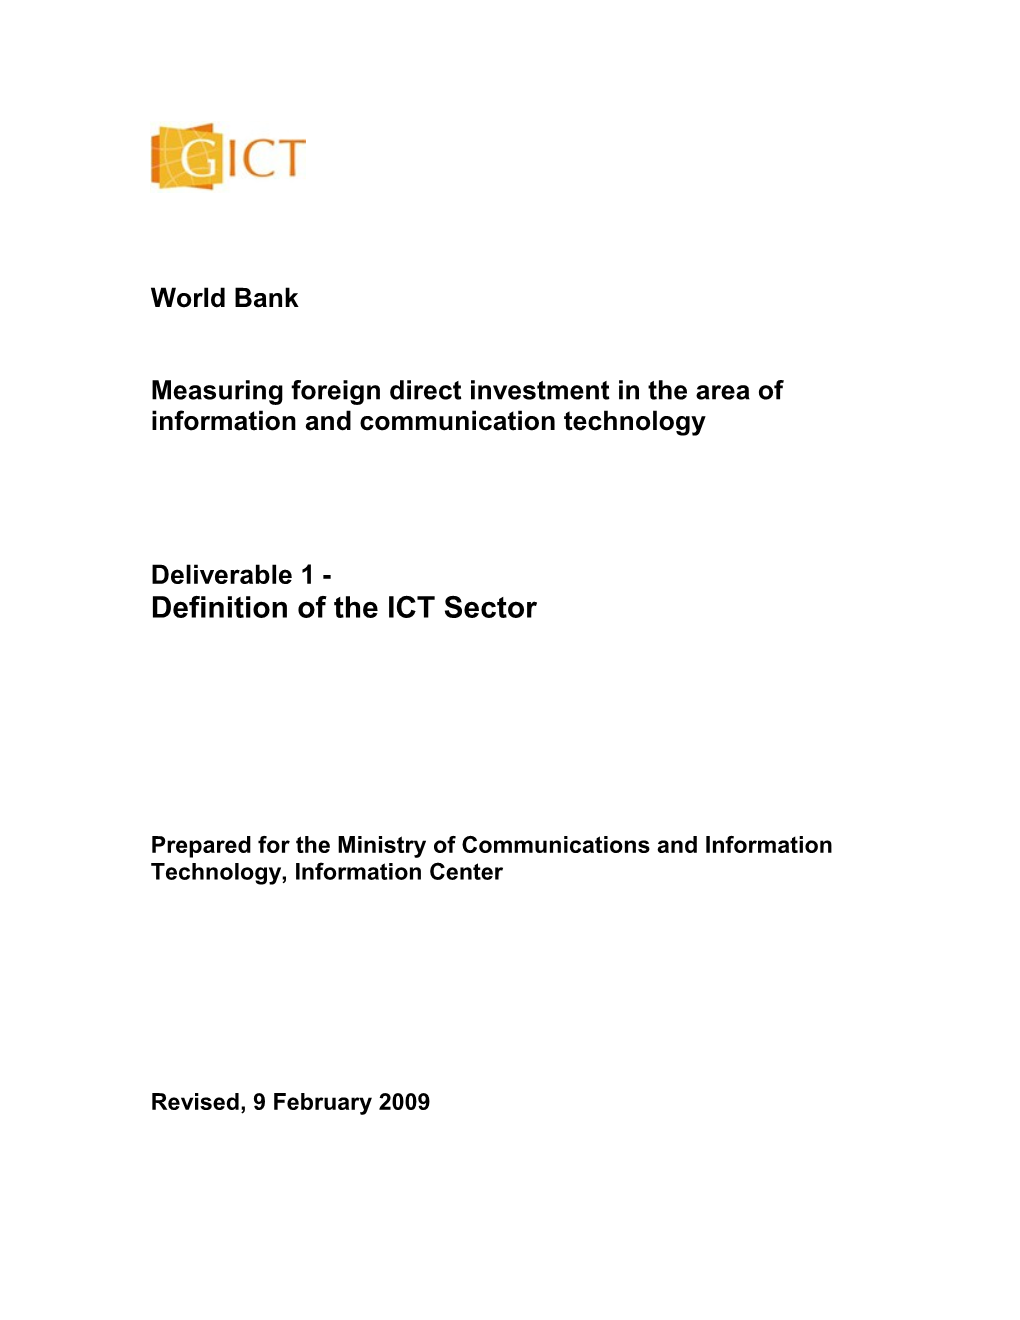 Measuring Foreign Direct Investment in the Area of Information and Communication Technology